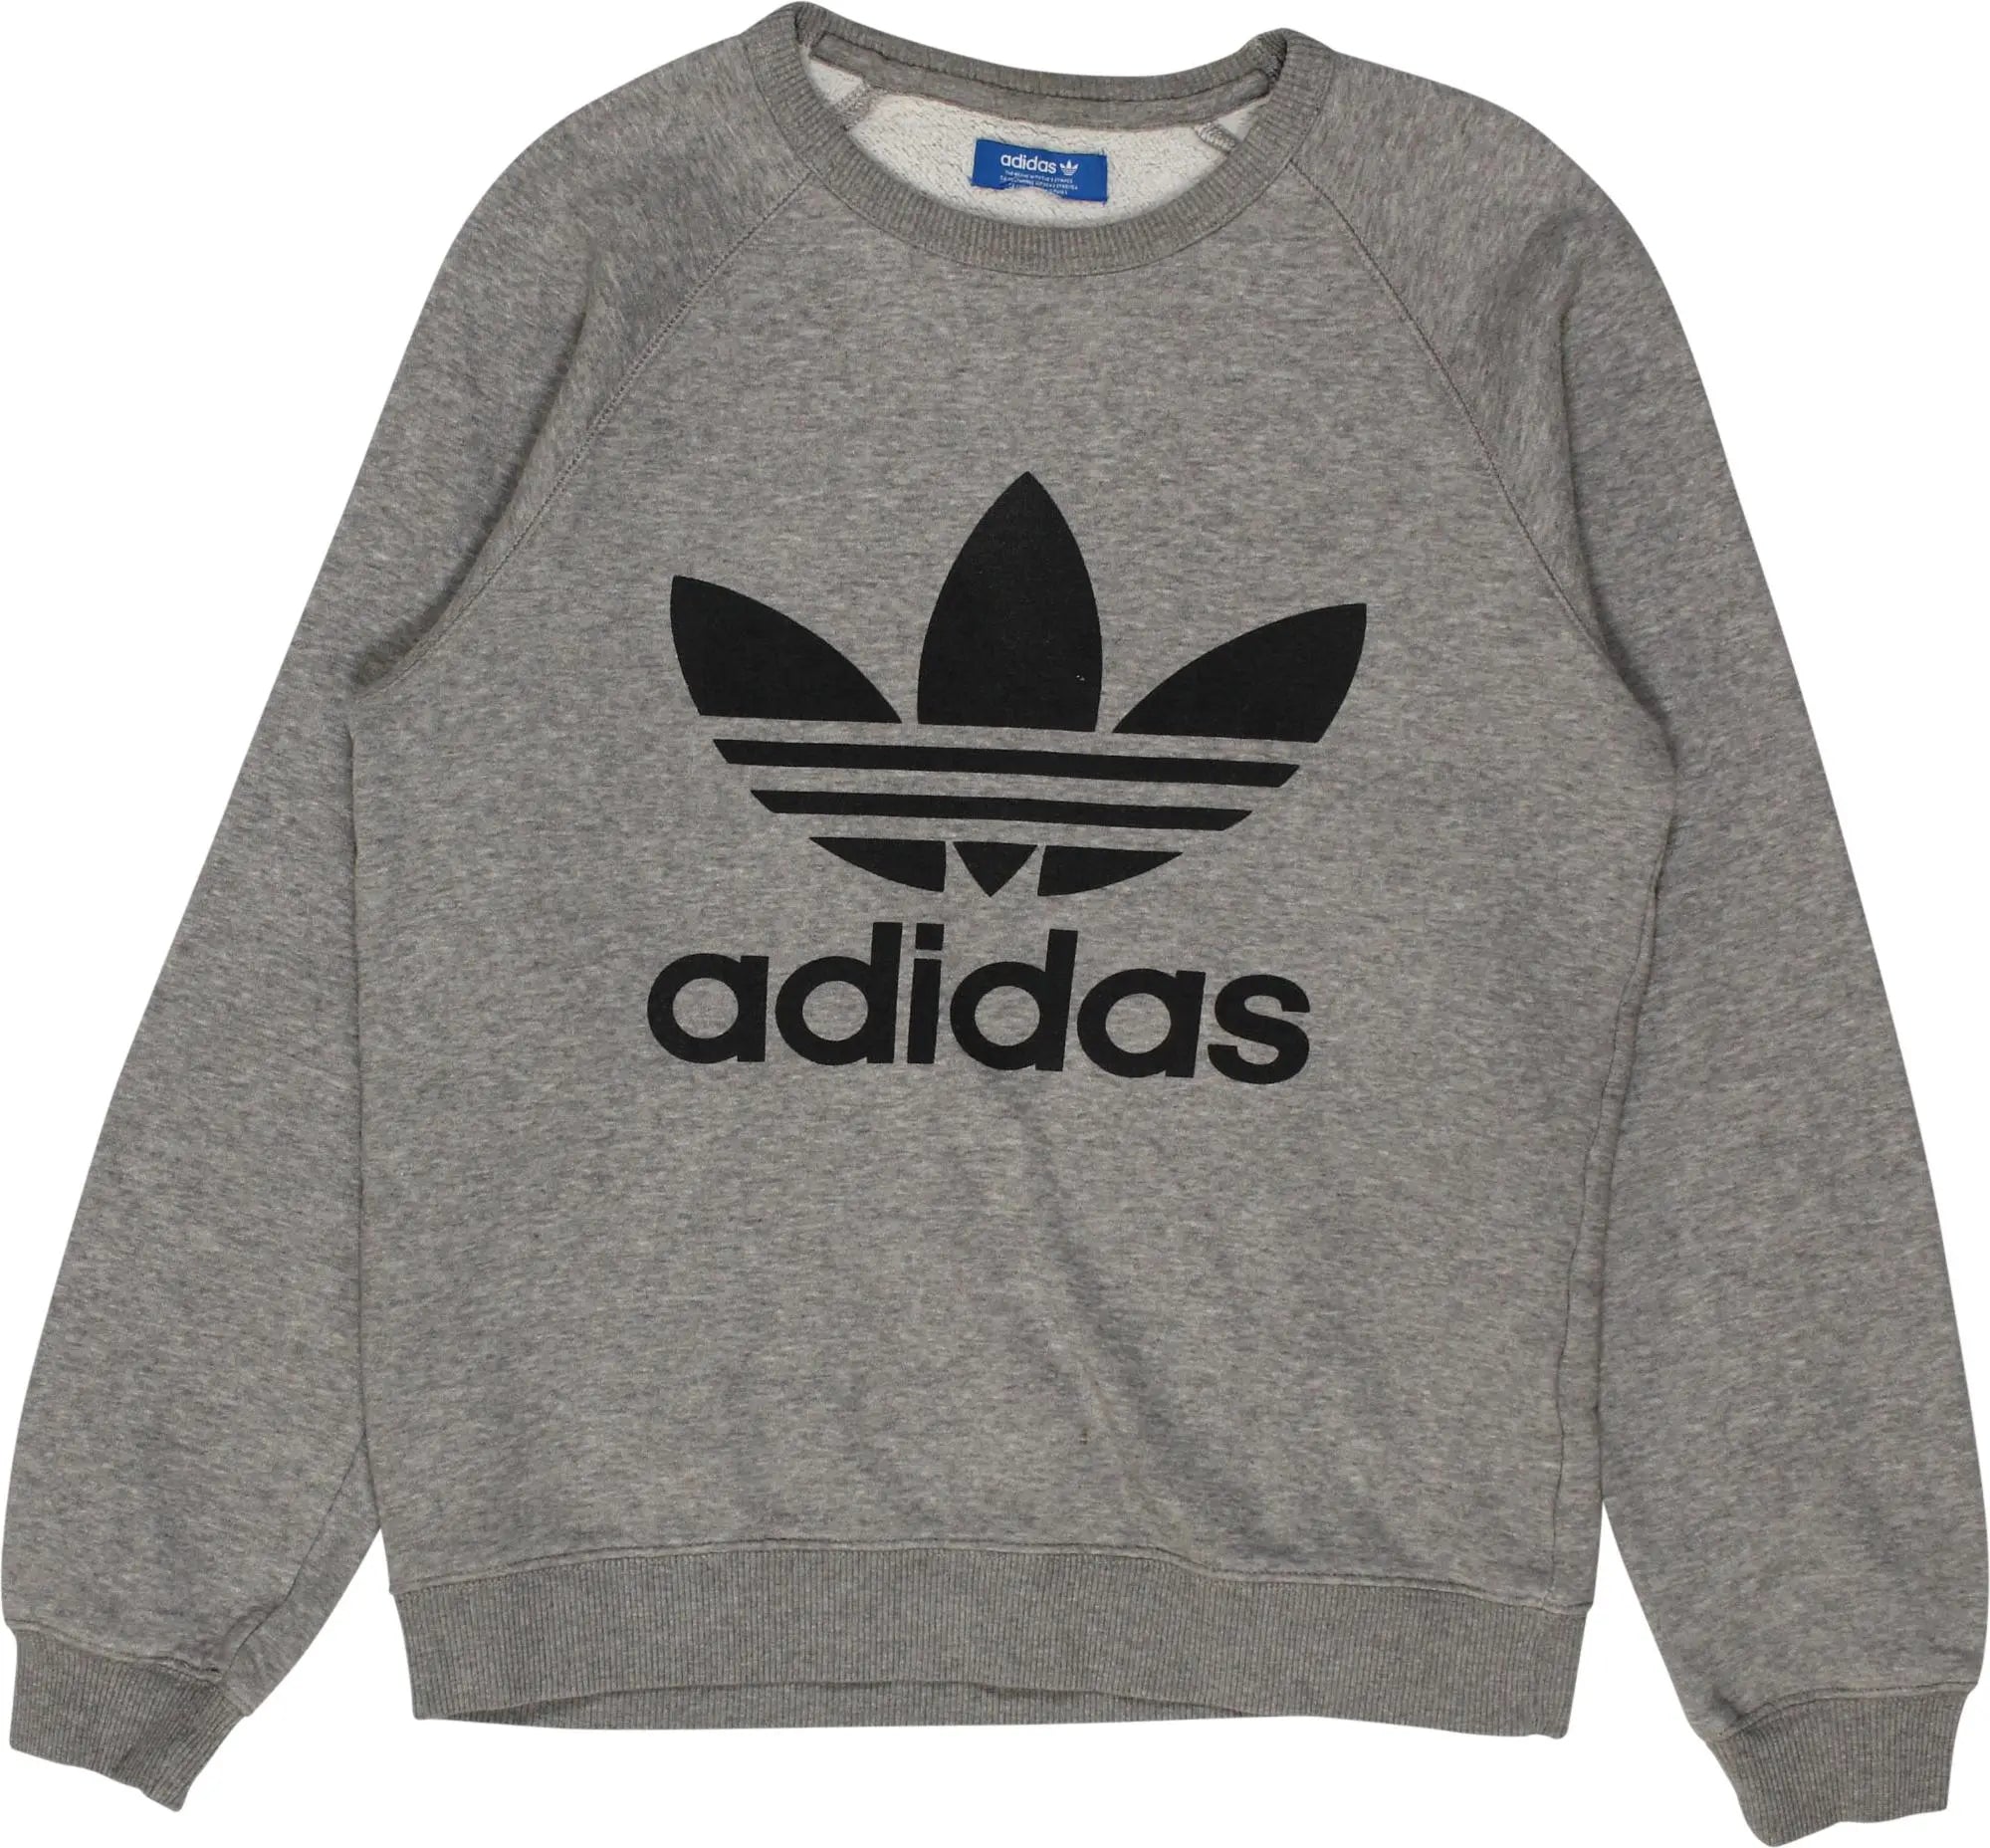 Levi's - Adidas Sweater- ThriftTale.com - Vintage and second handclothing